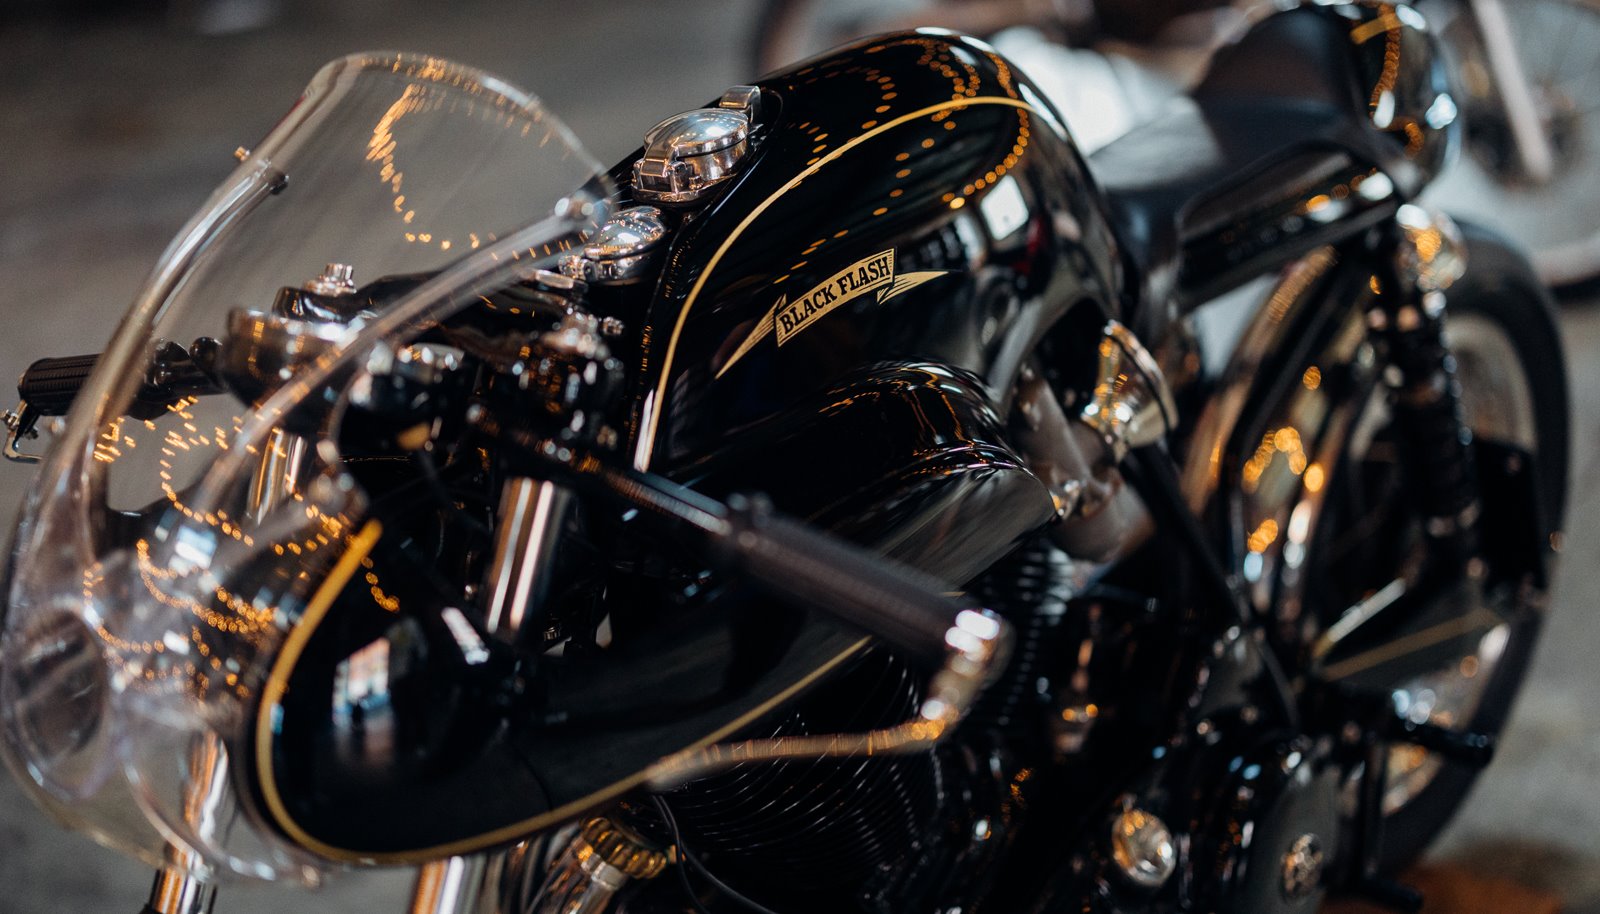 Read VICTORY MOTORCYCLE SHOW by Joe Jackson